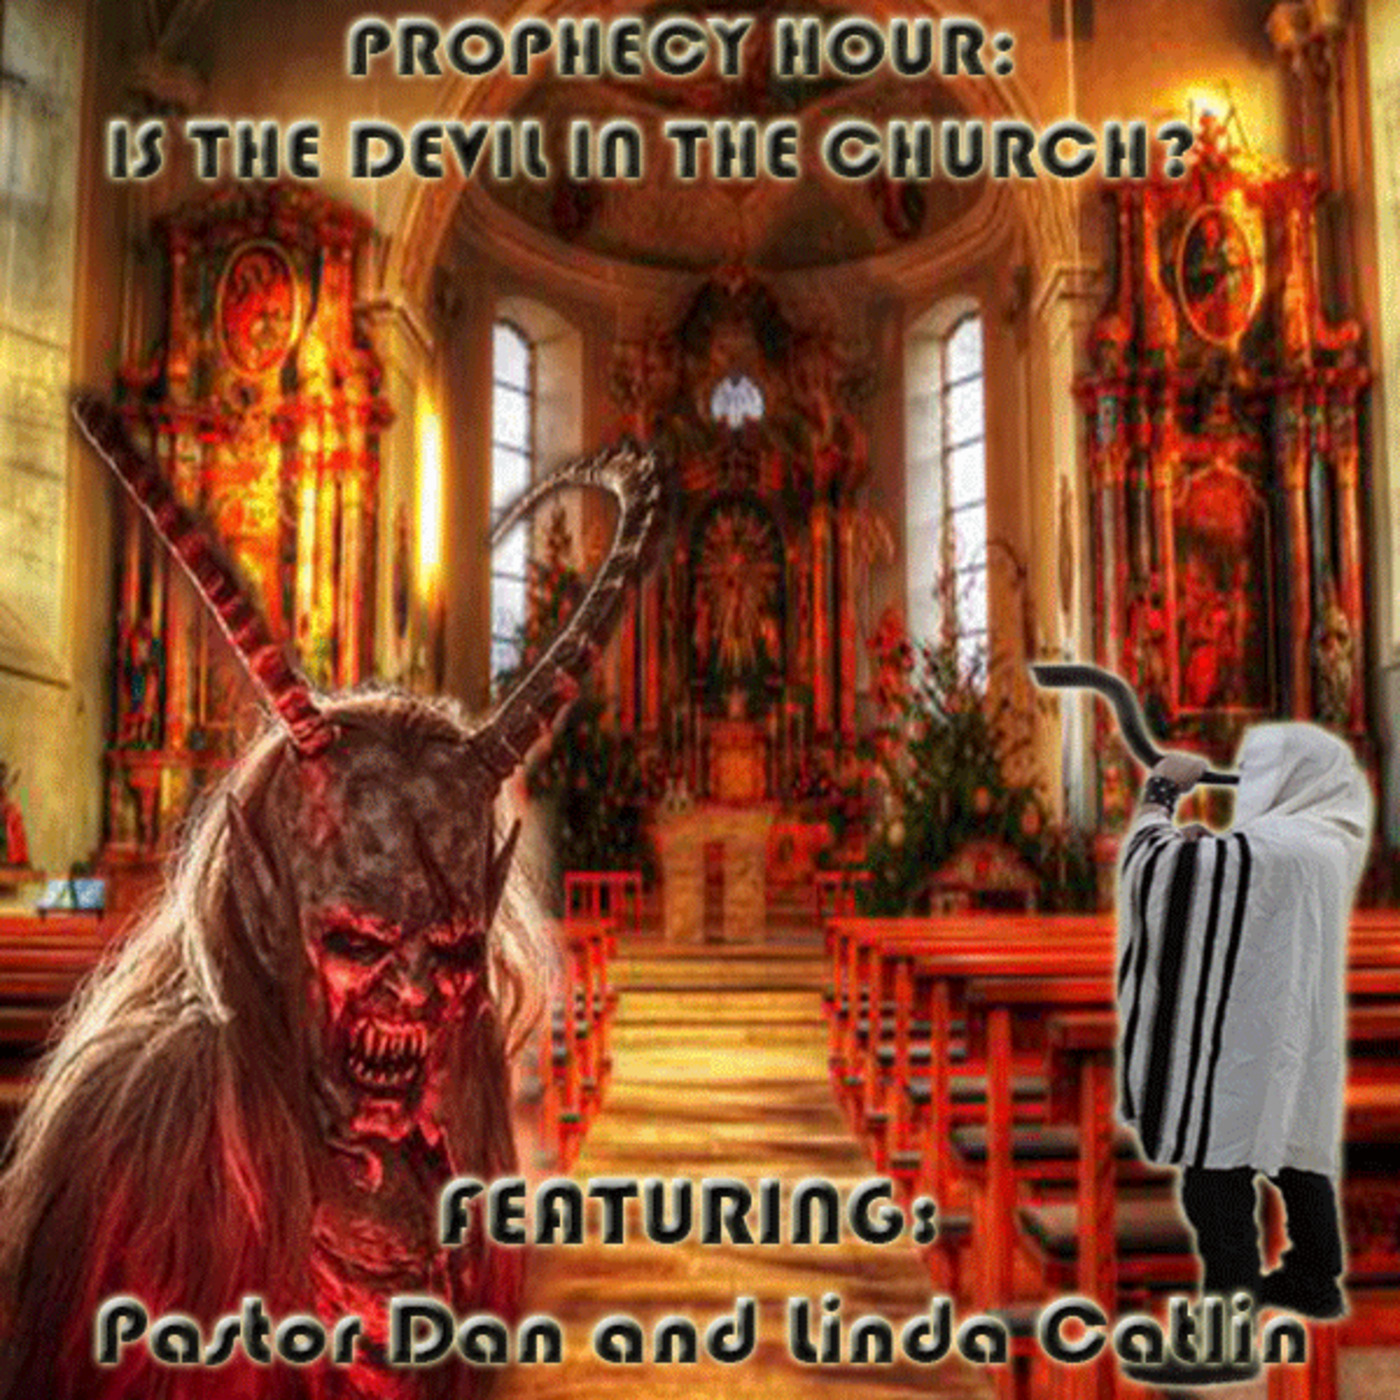 Episode 1147: PROPHECY HOUR: IS THE DEVIL IN THE CHURCH?